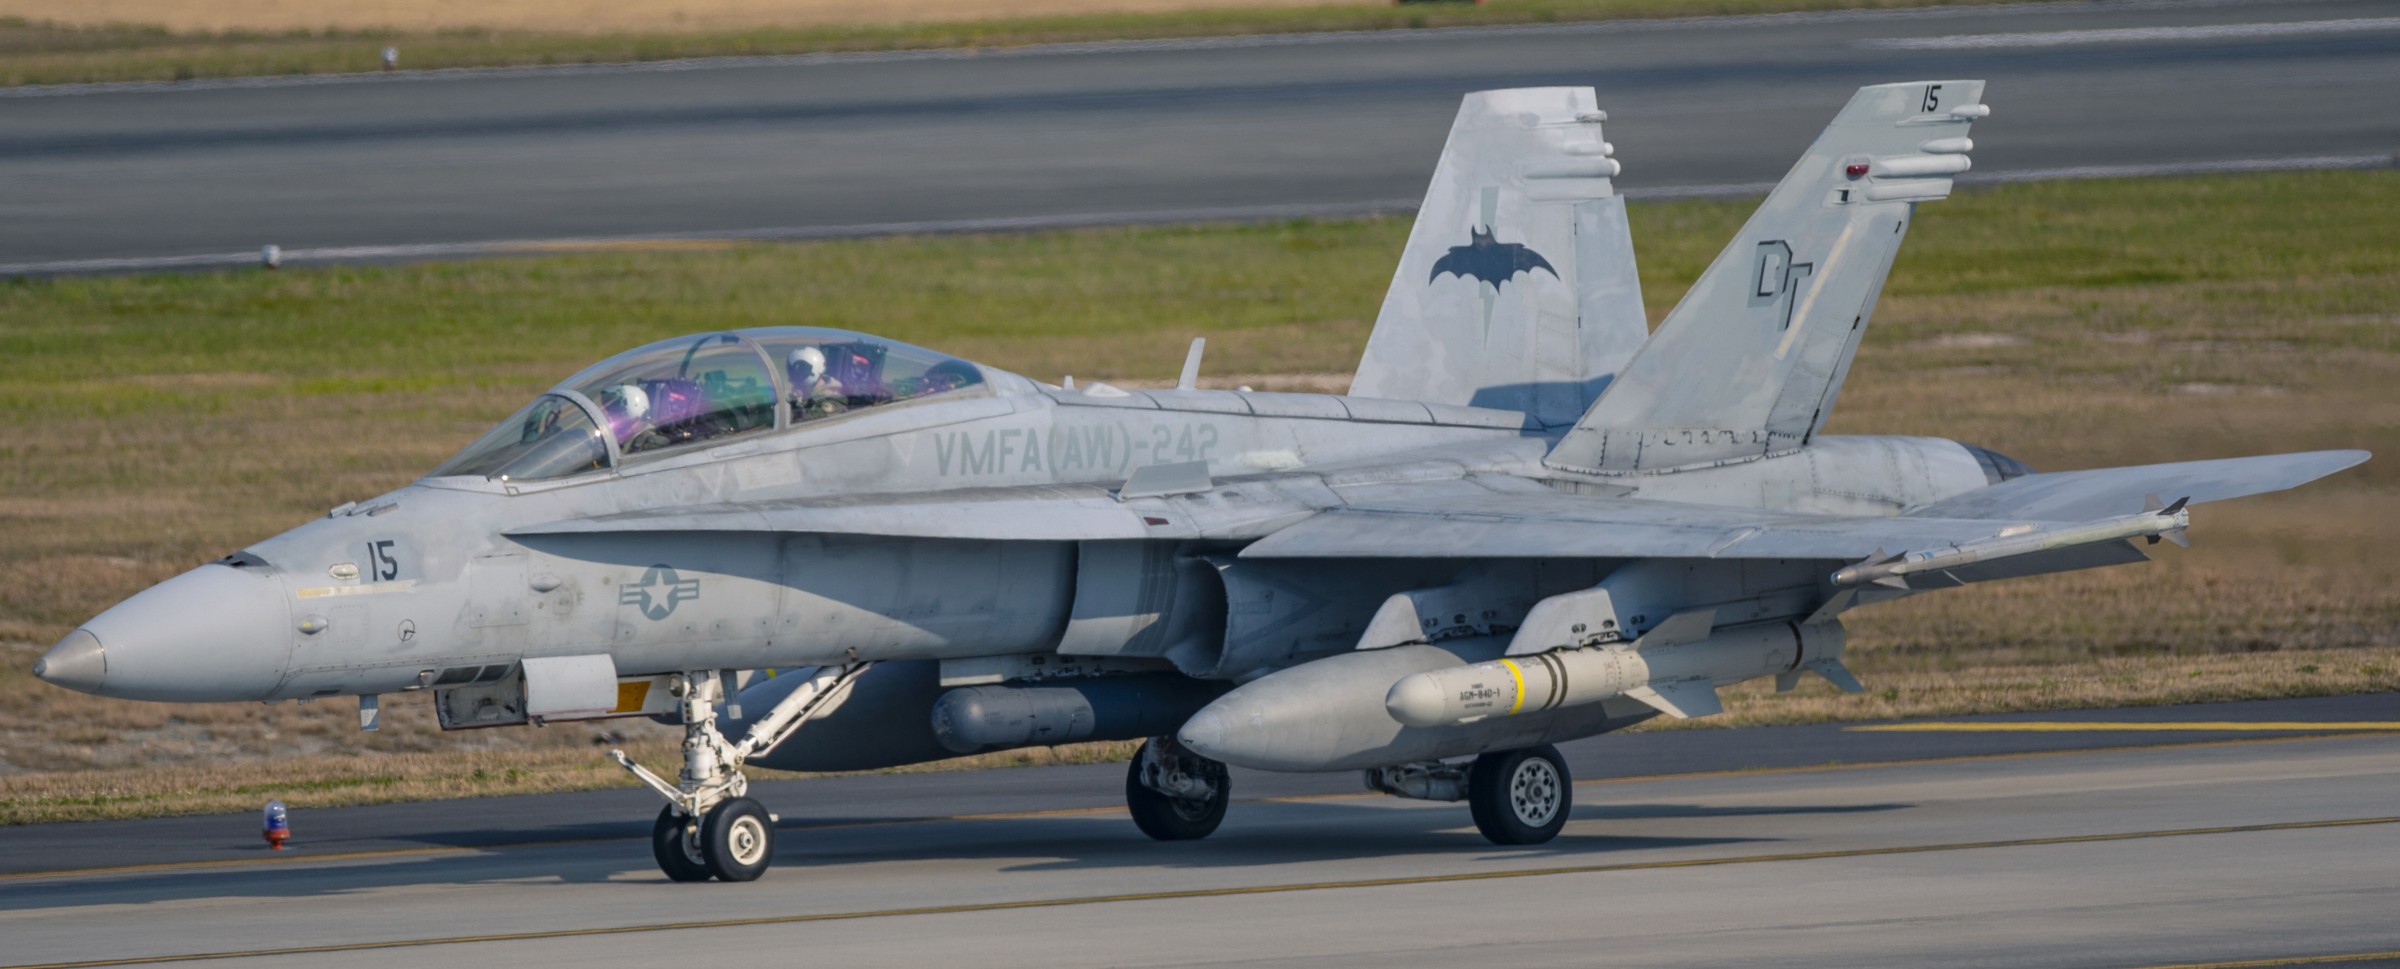 vmfa(aw)-242 bats marine all-weather fighter attack squadron usmc f/a-18d hornet 108